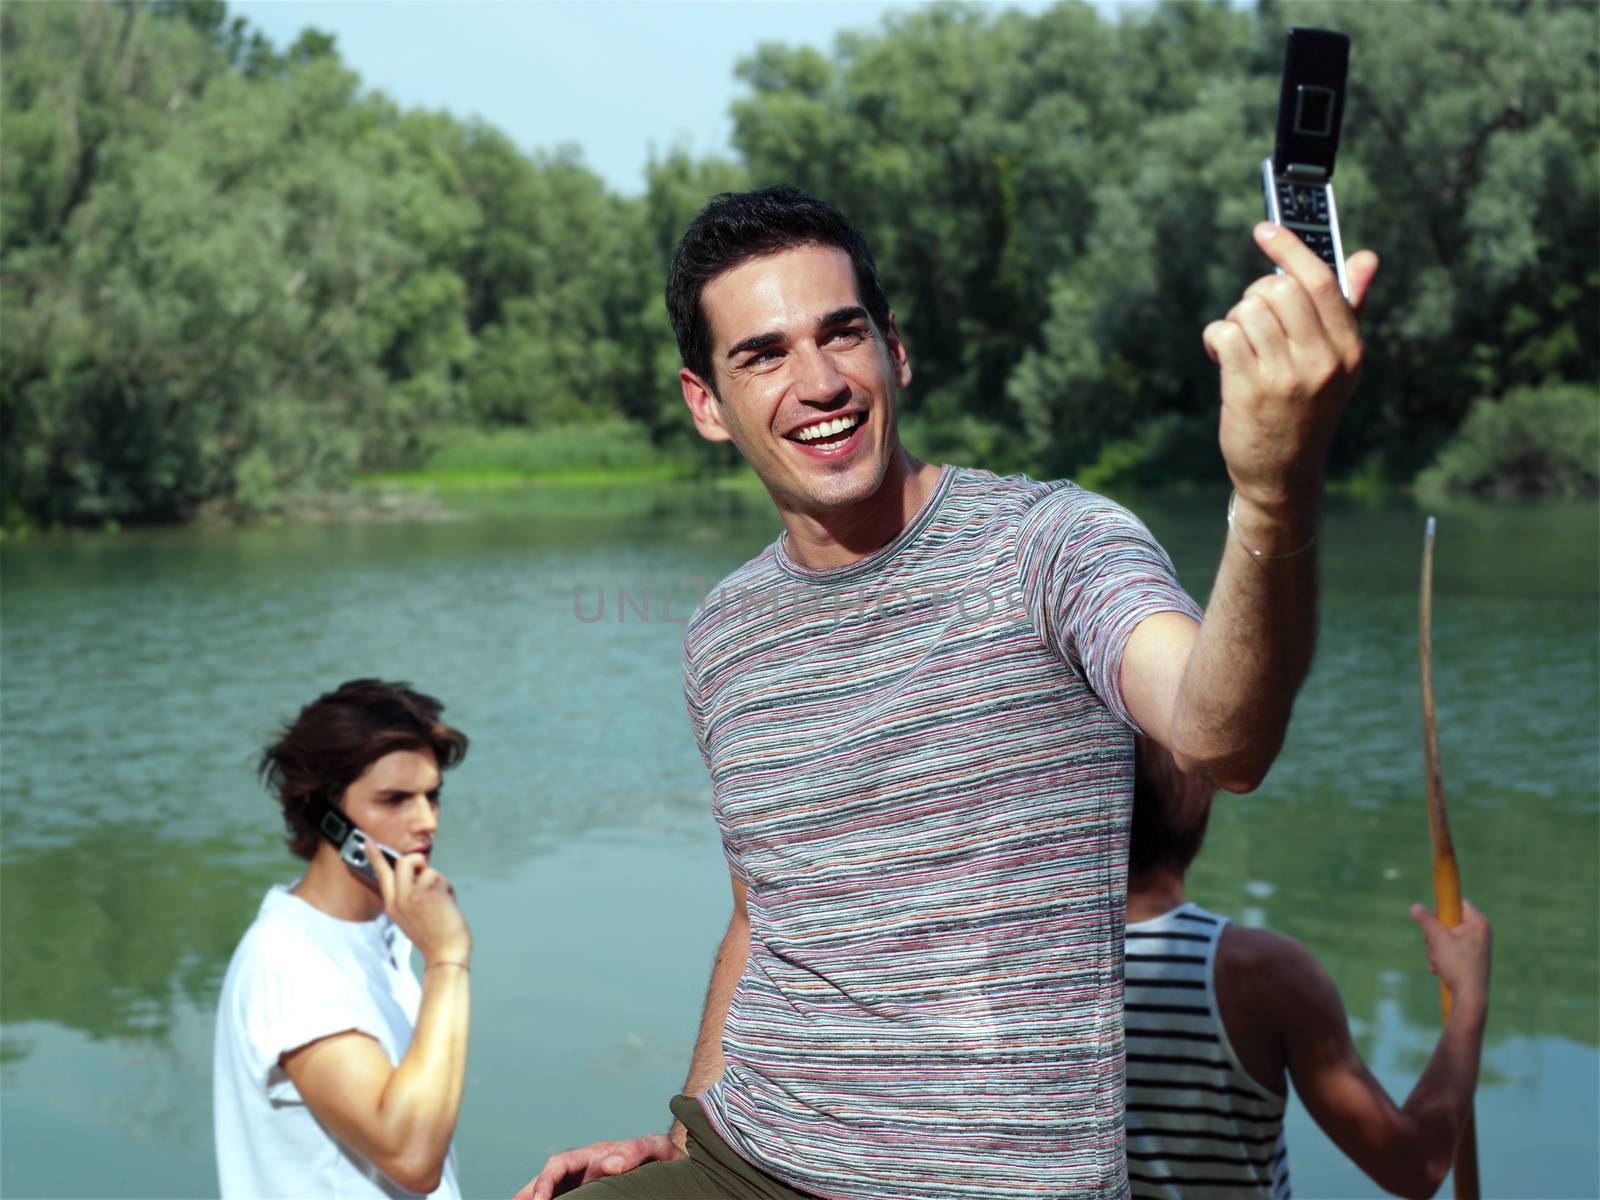 Handsome young guy taking photo with cellphone in park - Outdoor 